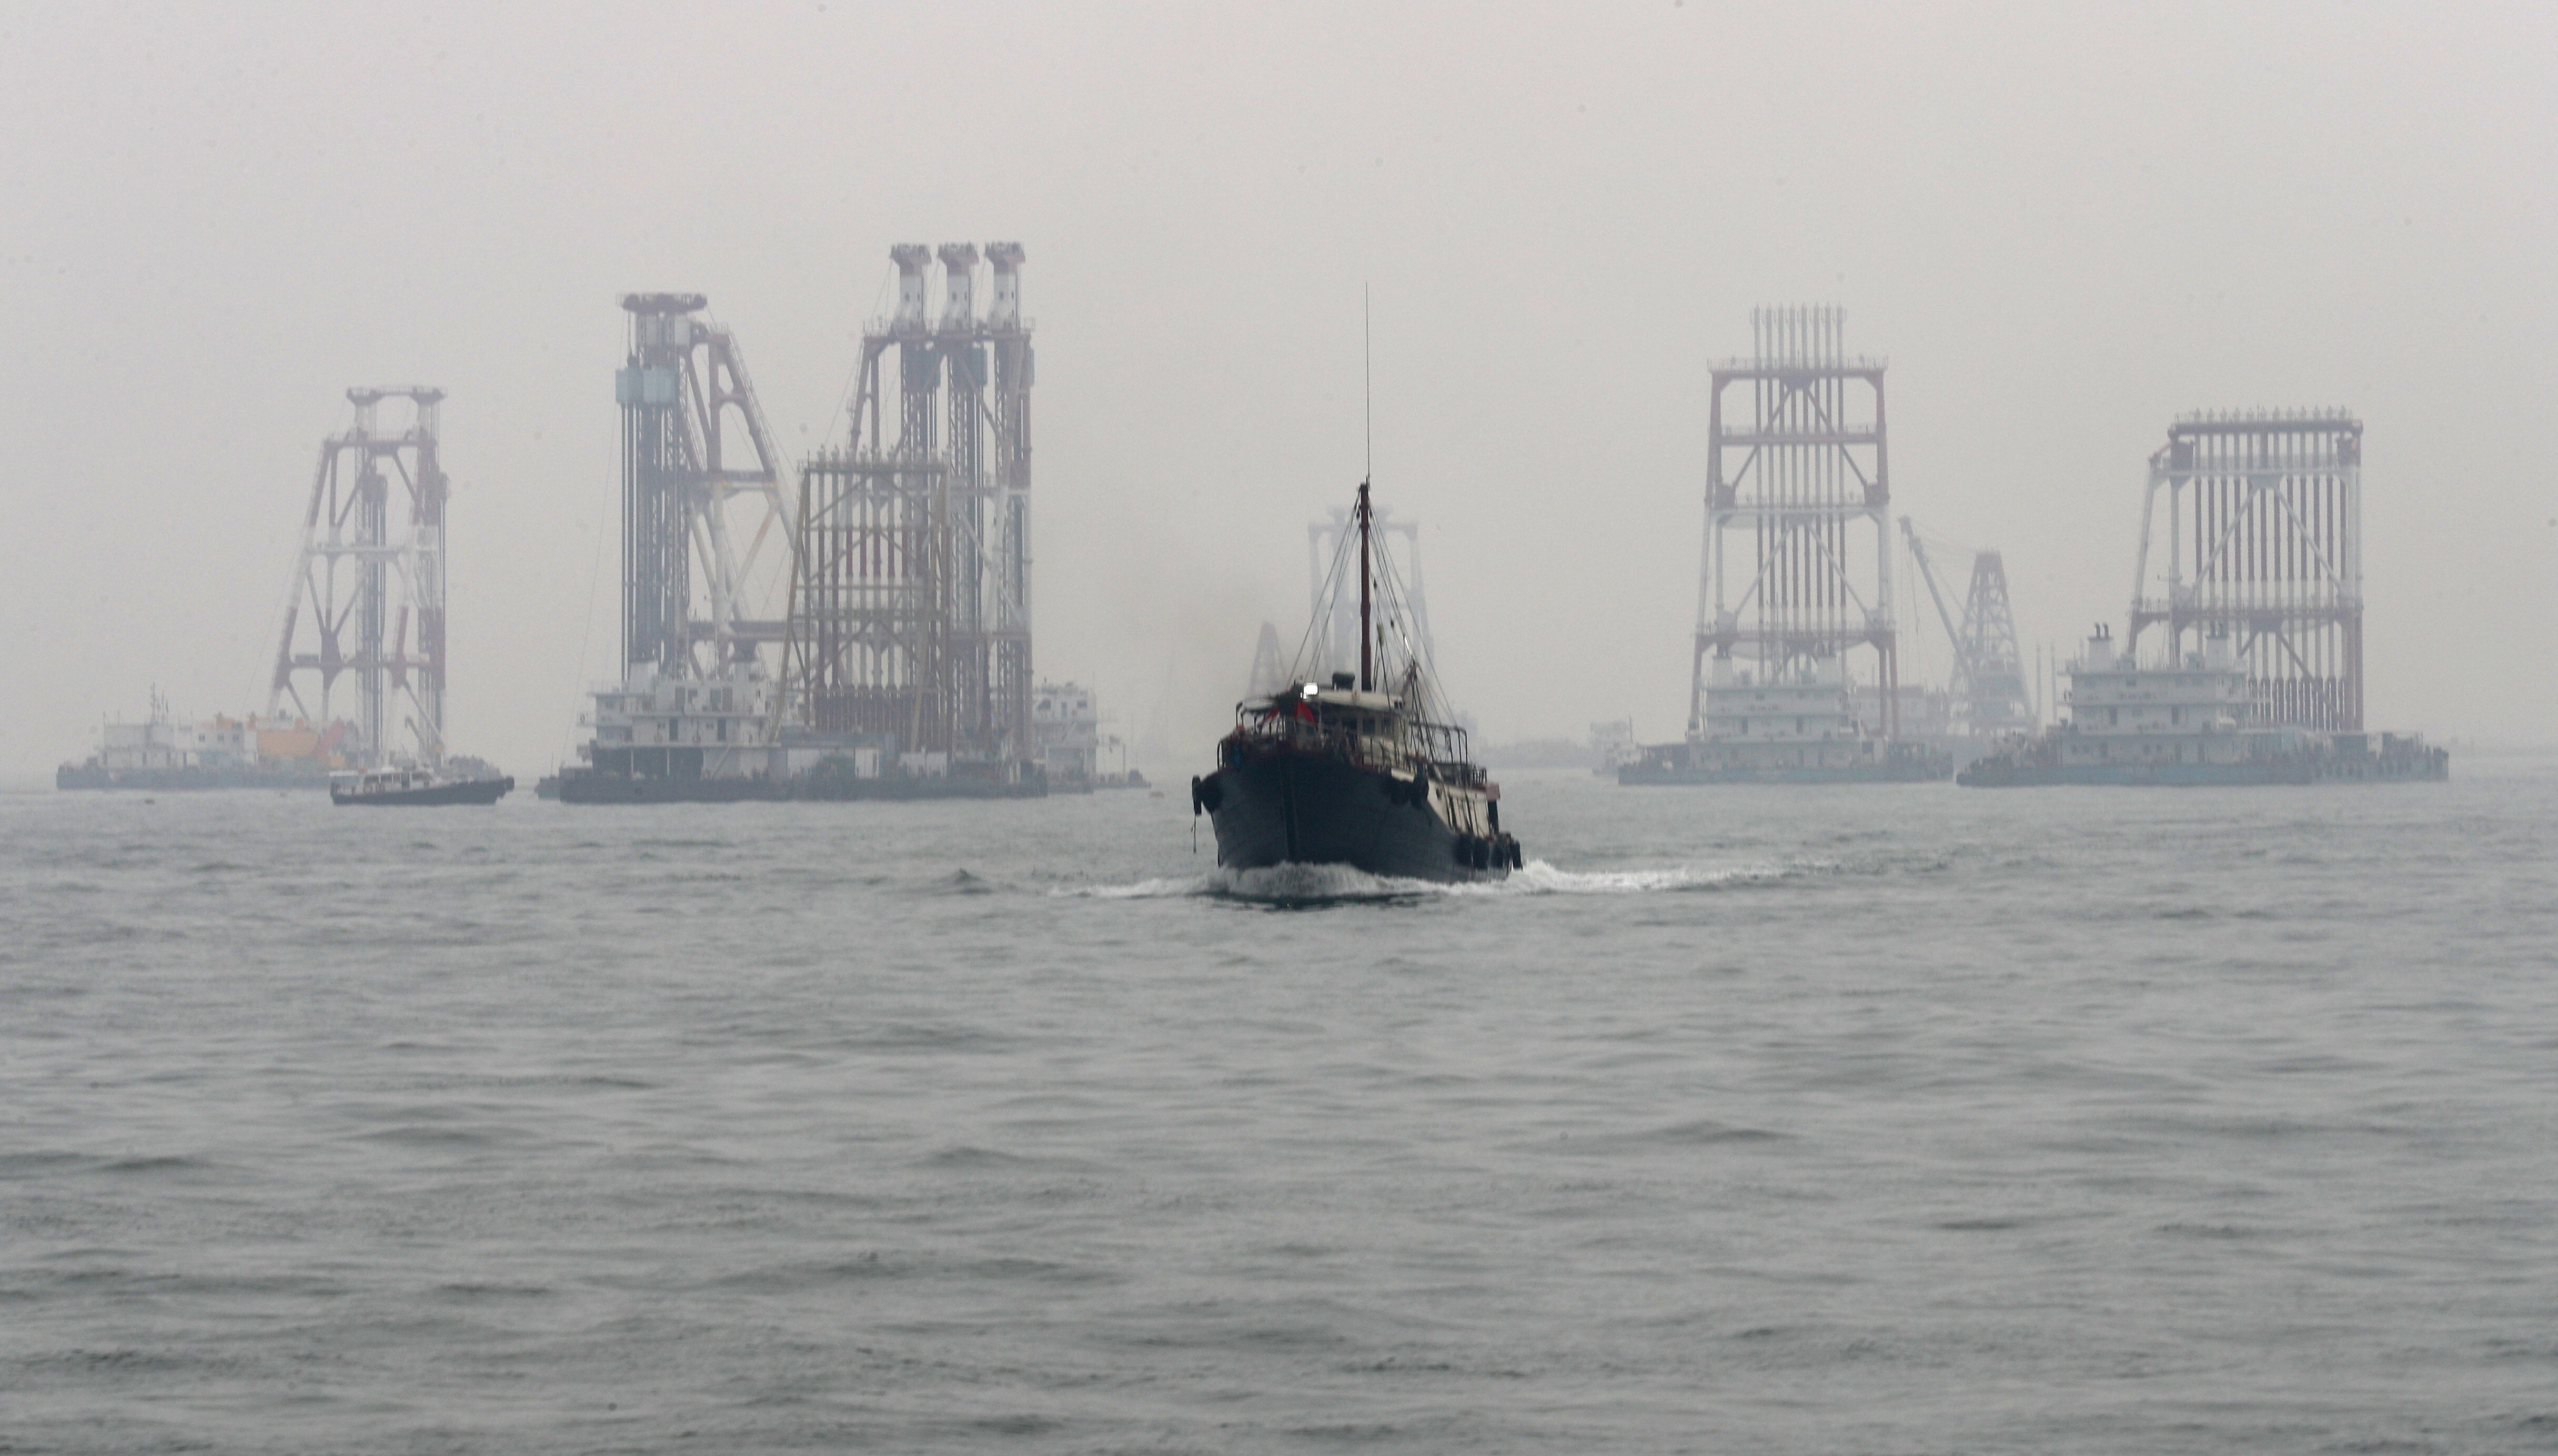 A boat heads away from construction work as part of the third runway at Hong Kong International Airport on August 20, 2018. Uncertainty over the future of the aviation industry and potential cost overruns raise questions about the need for the project. Photo: Nora Tam